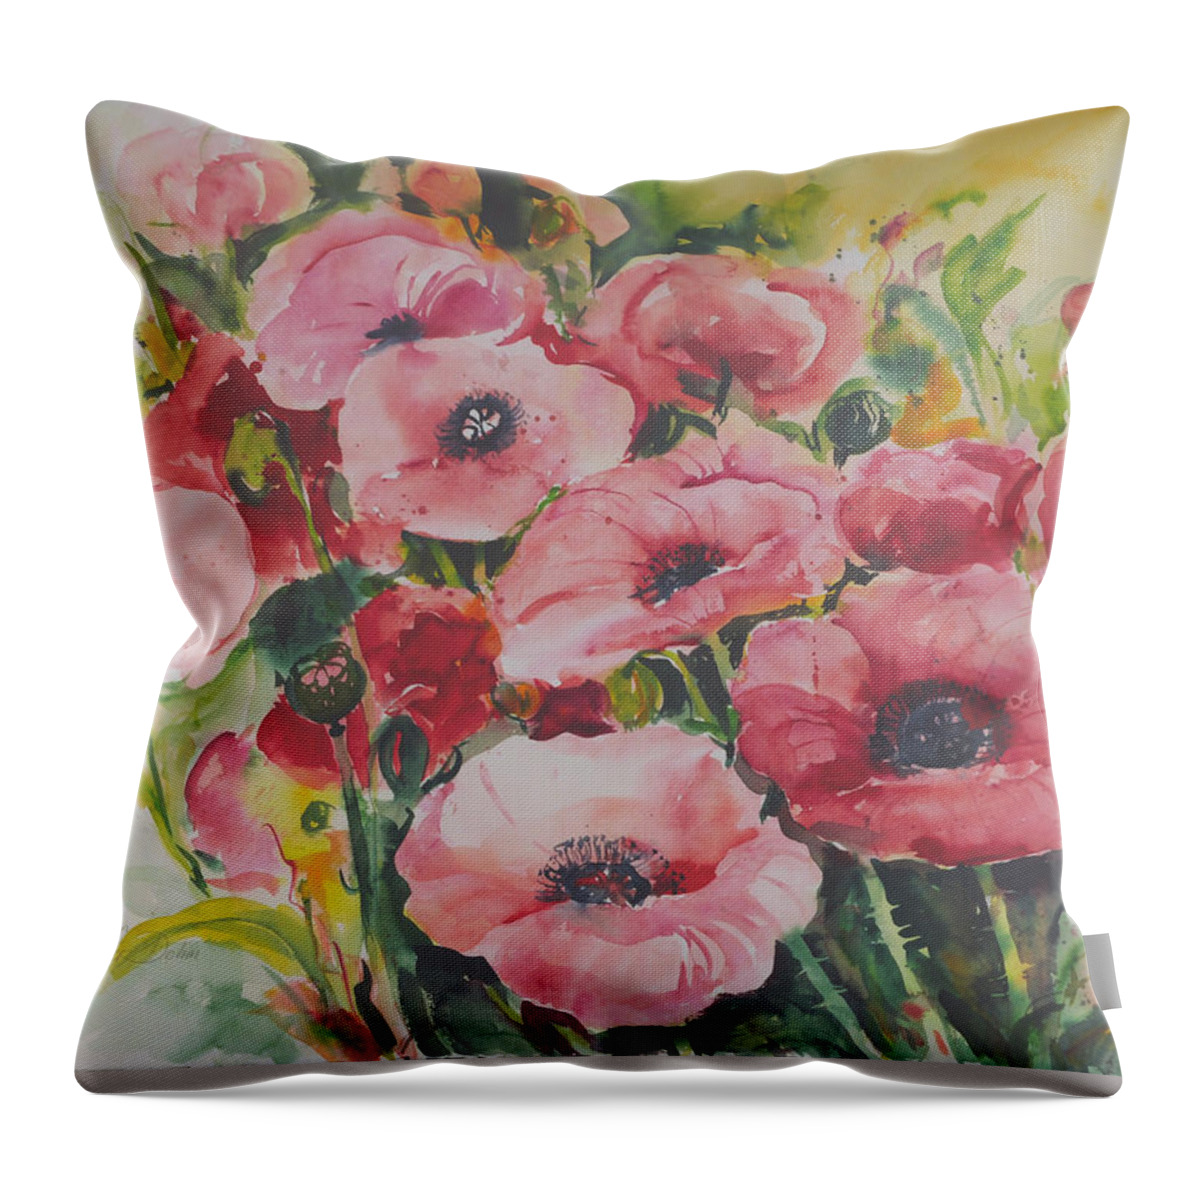 Watercolor Throw Pillow featuring the painting Poppies #2 by Ingrid Dohm